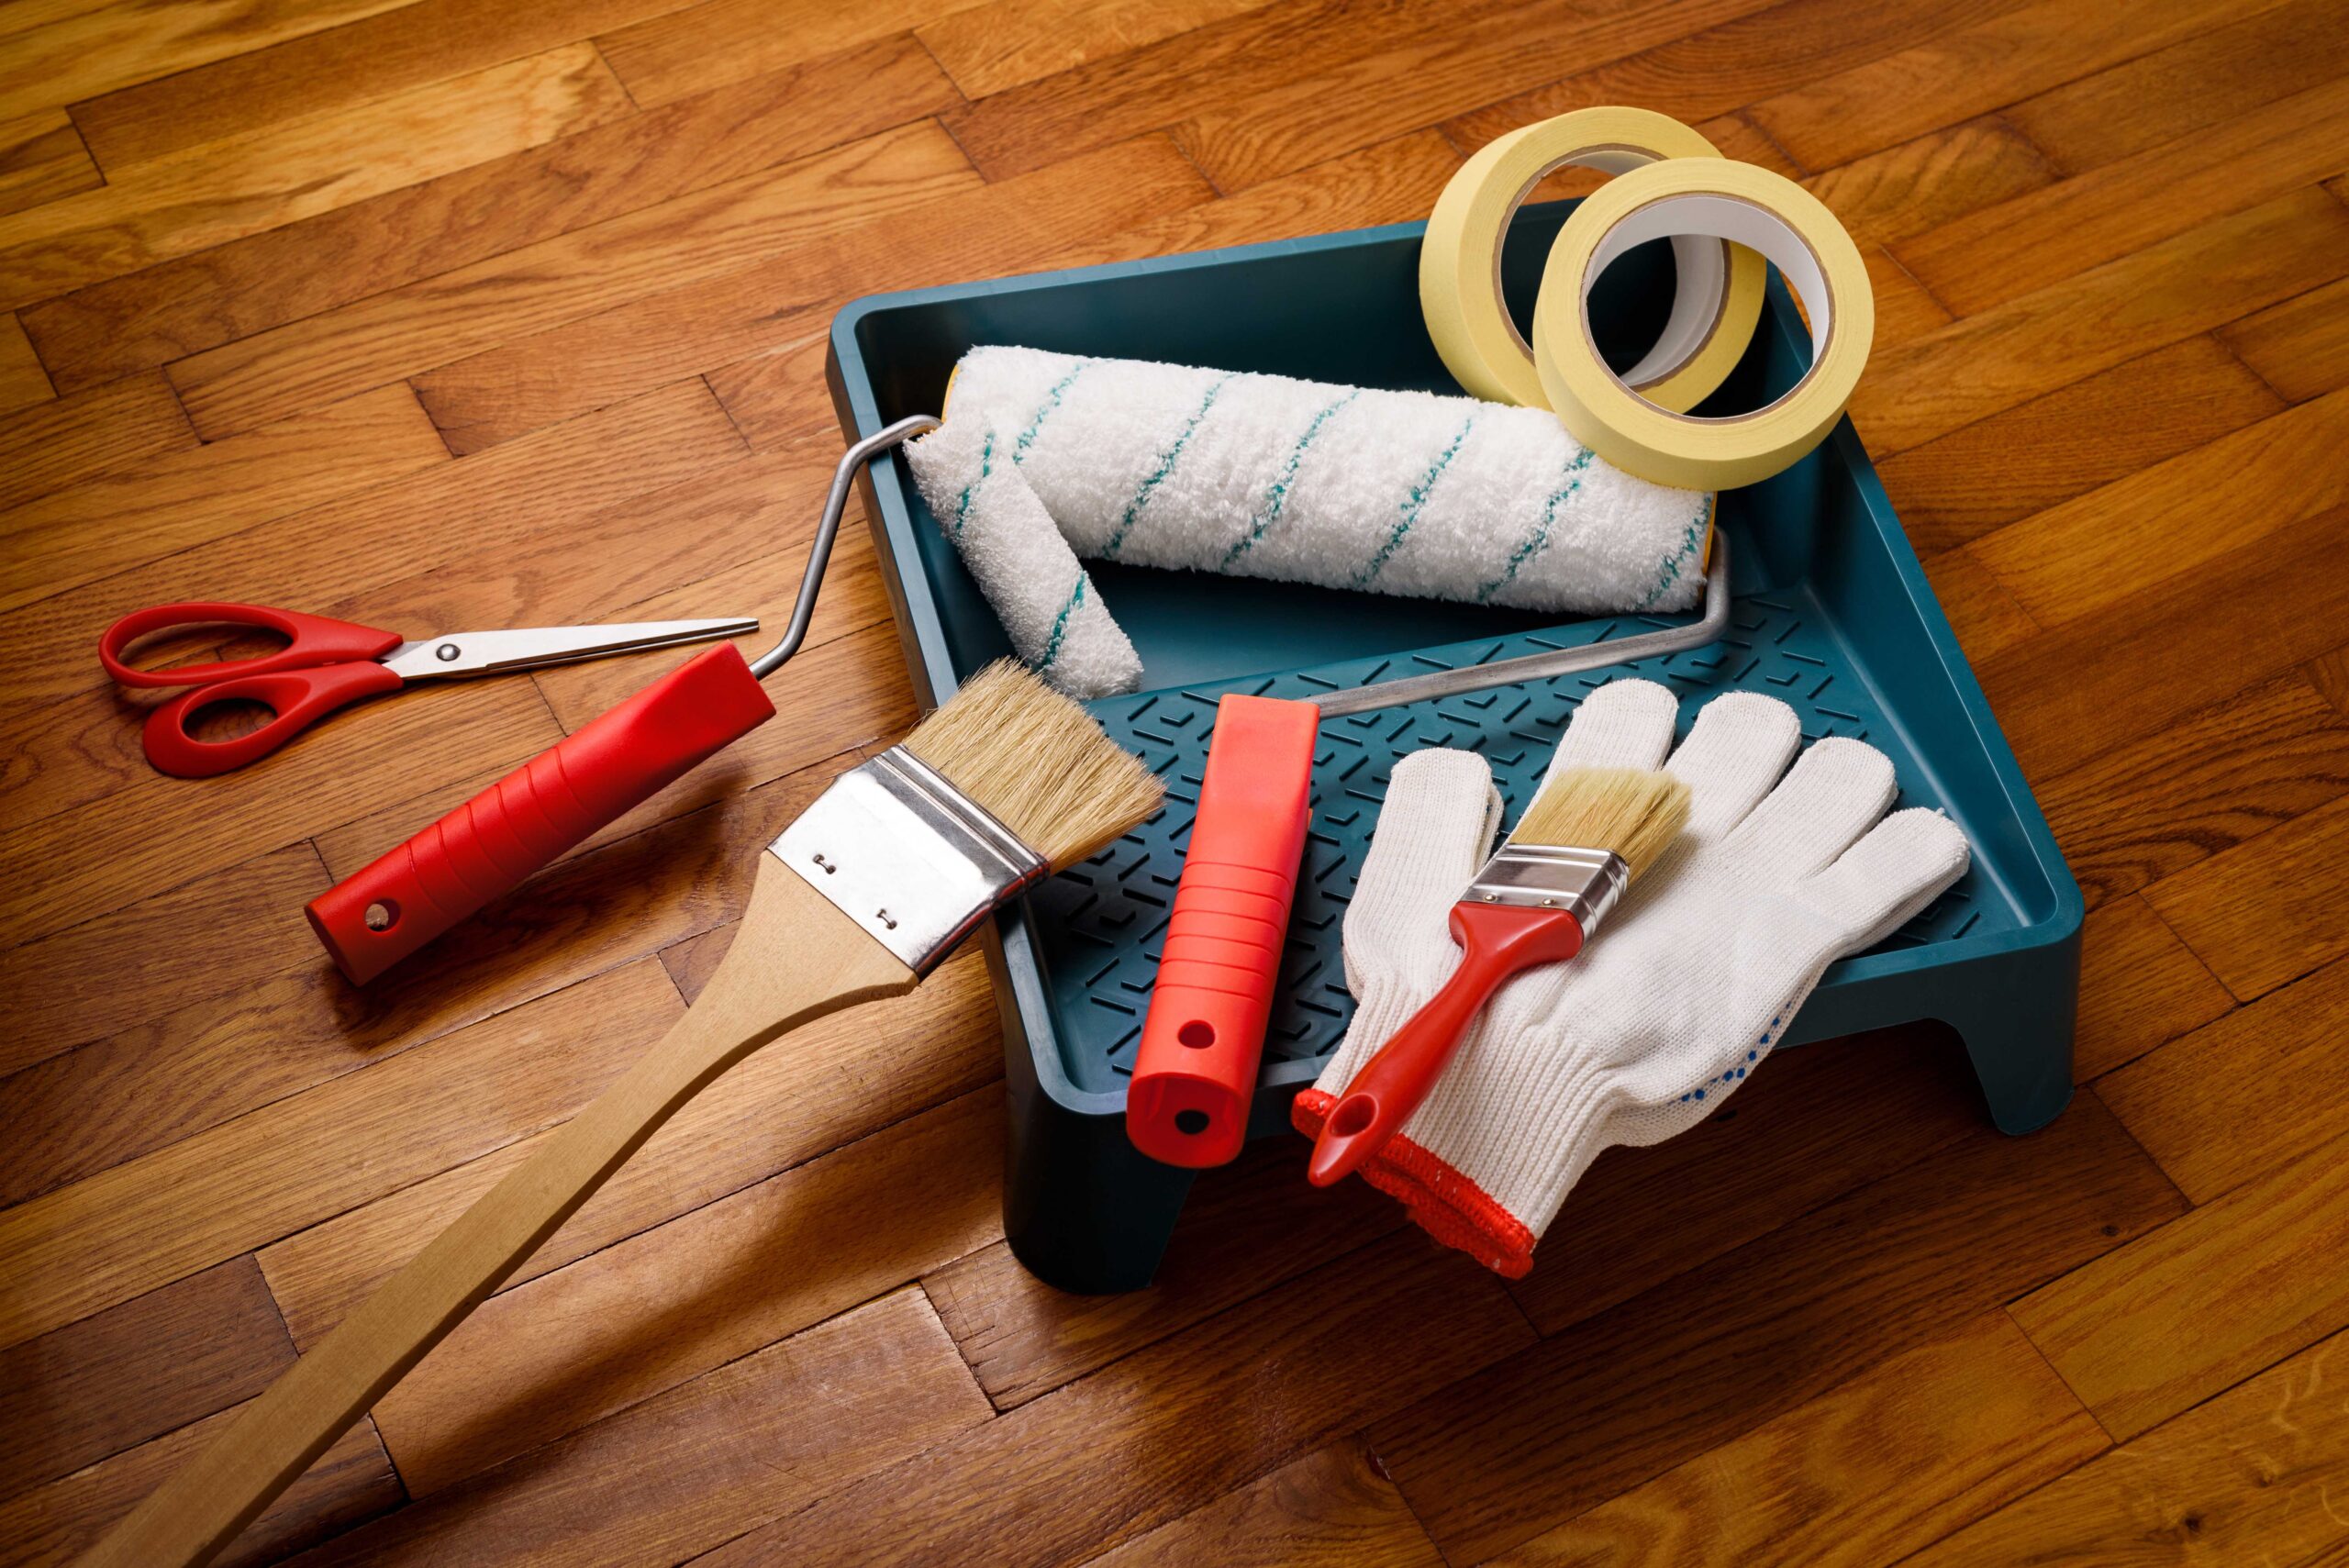 Set of tools for painting walls at home: painter's tape, gloves, scissors, paint rollers and tray, brush